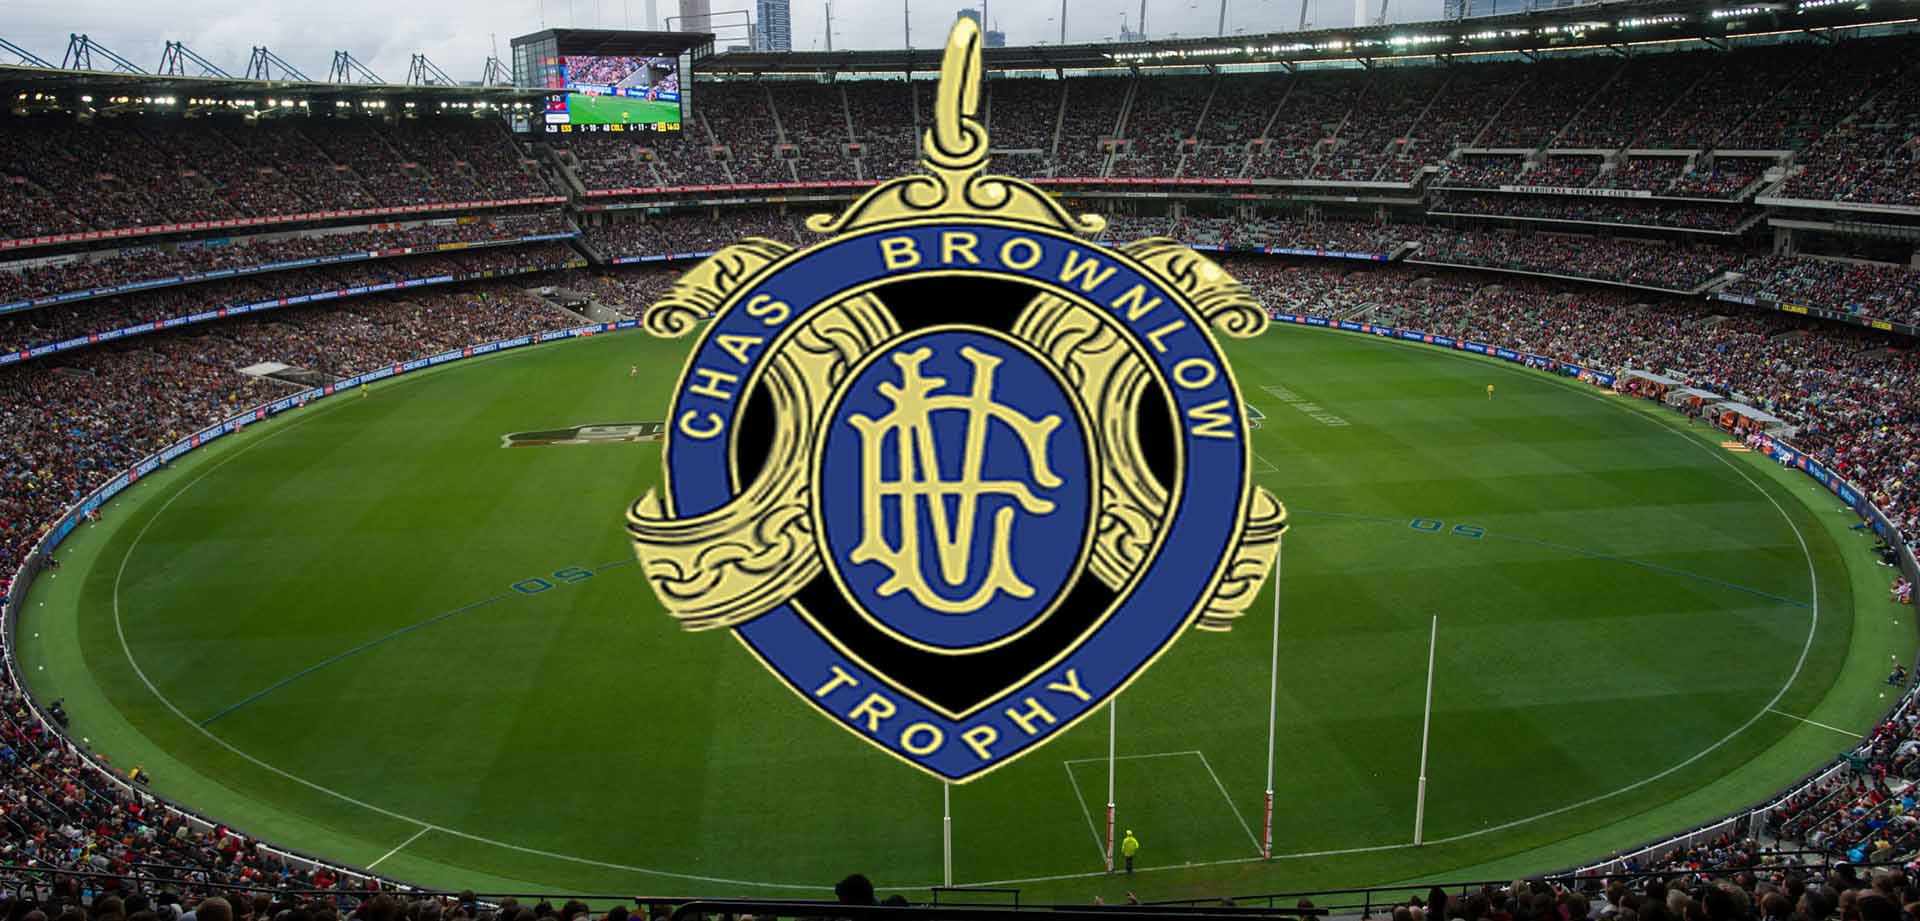 Brownlow Medal 2022 How to Watch Brownlow Online, TV Channel, Date